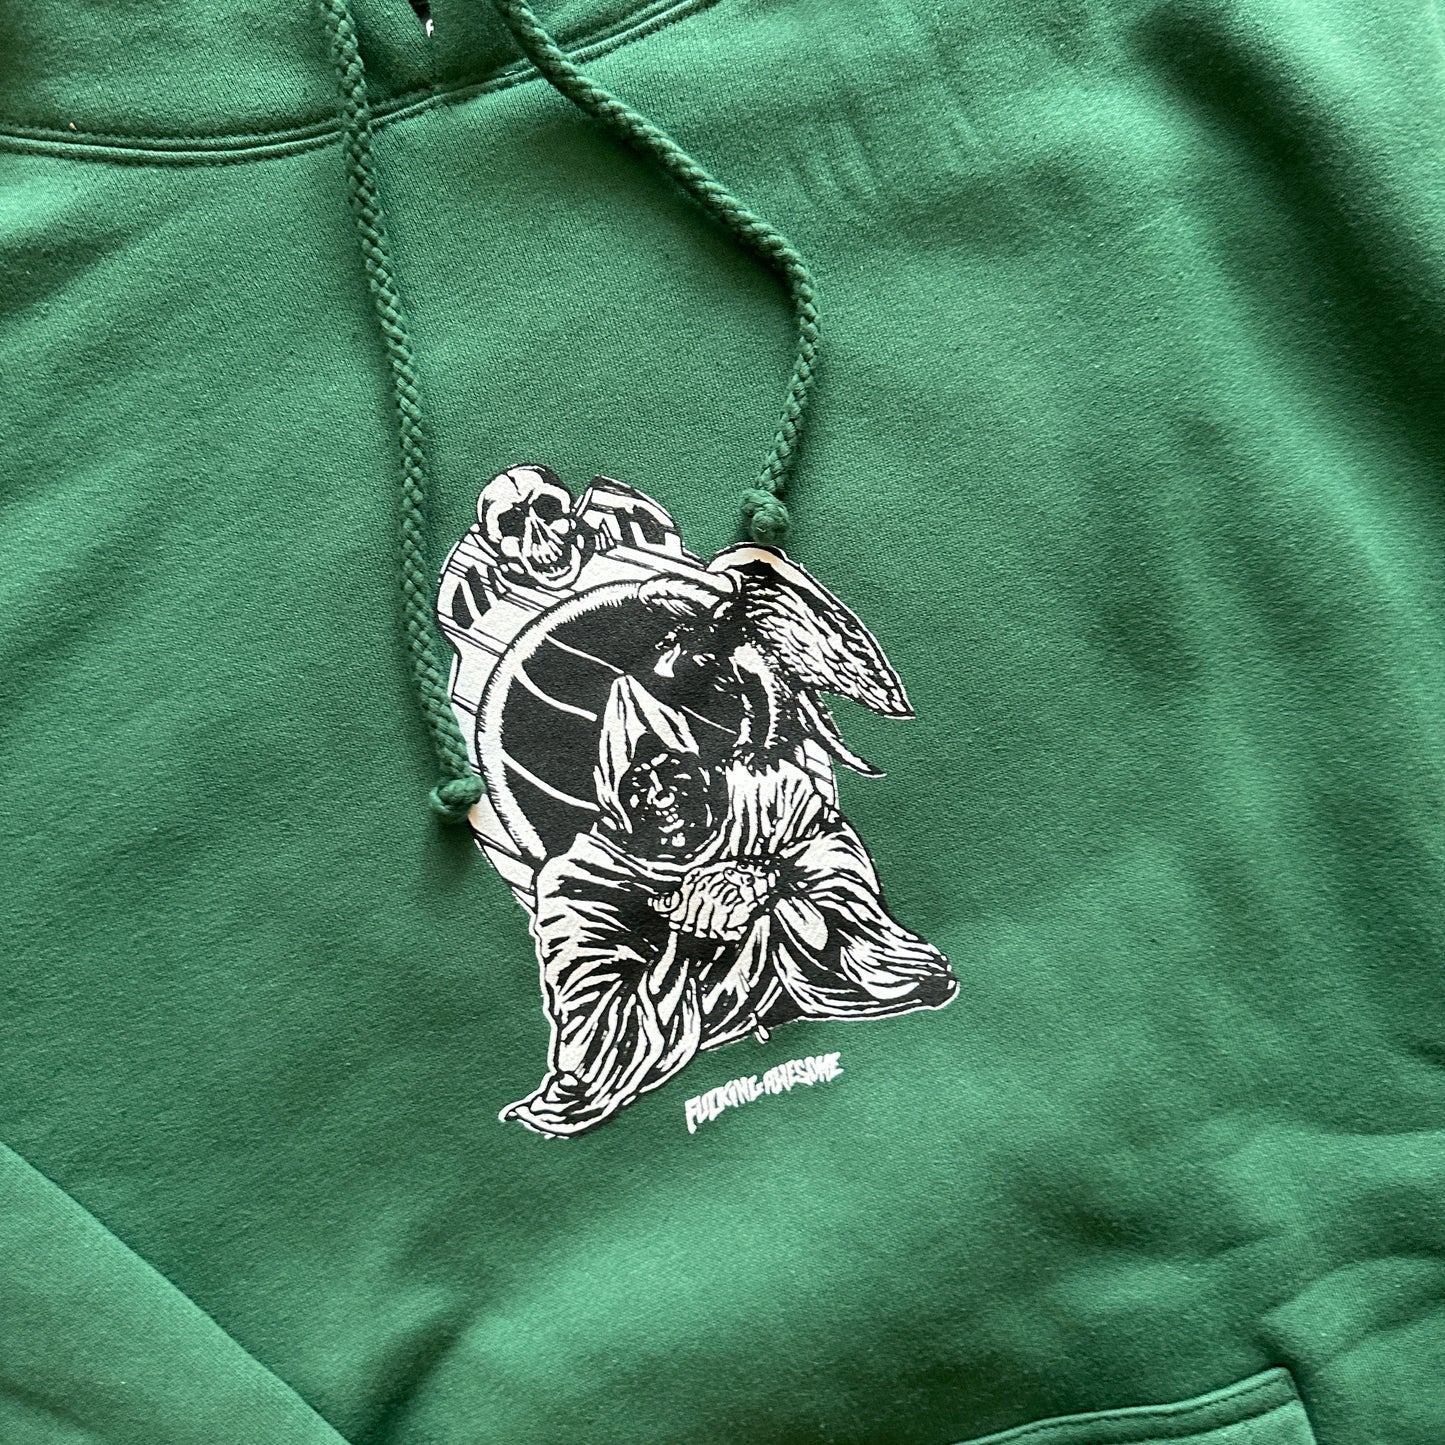 Fucking Awesome - Reaper Mirror Green Hoodie Large